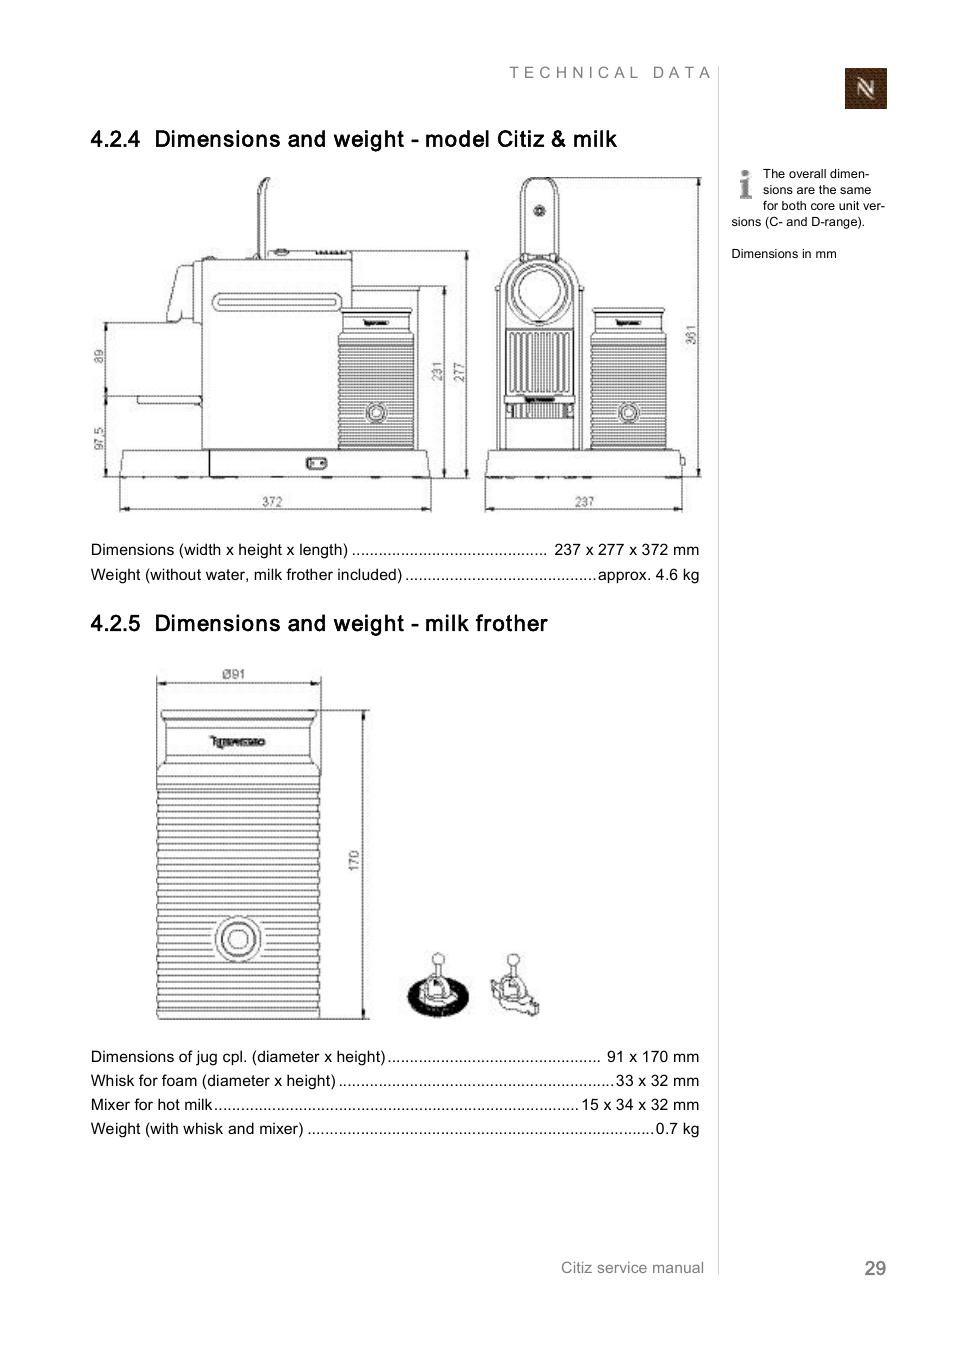 4 dimensions and weight model citiz & milk, 5 dimensions and weight milk  frother | Nespresso Citiz & Co EF 488 User Manual | Page 29 / 158